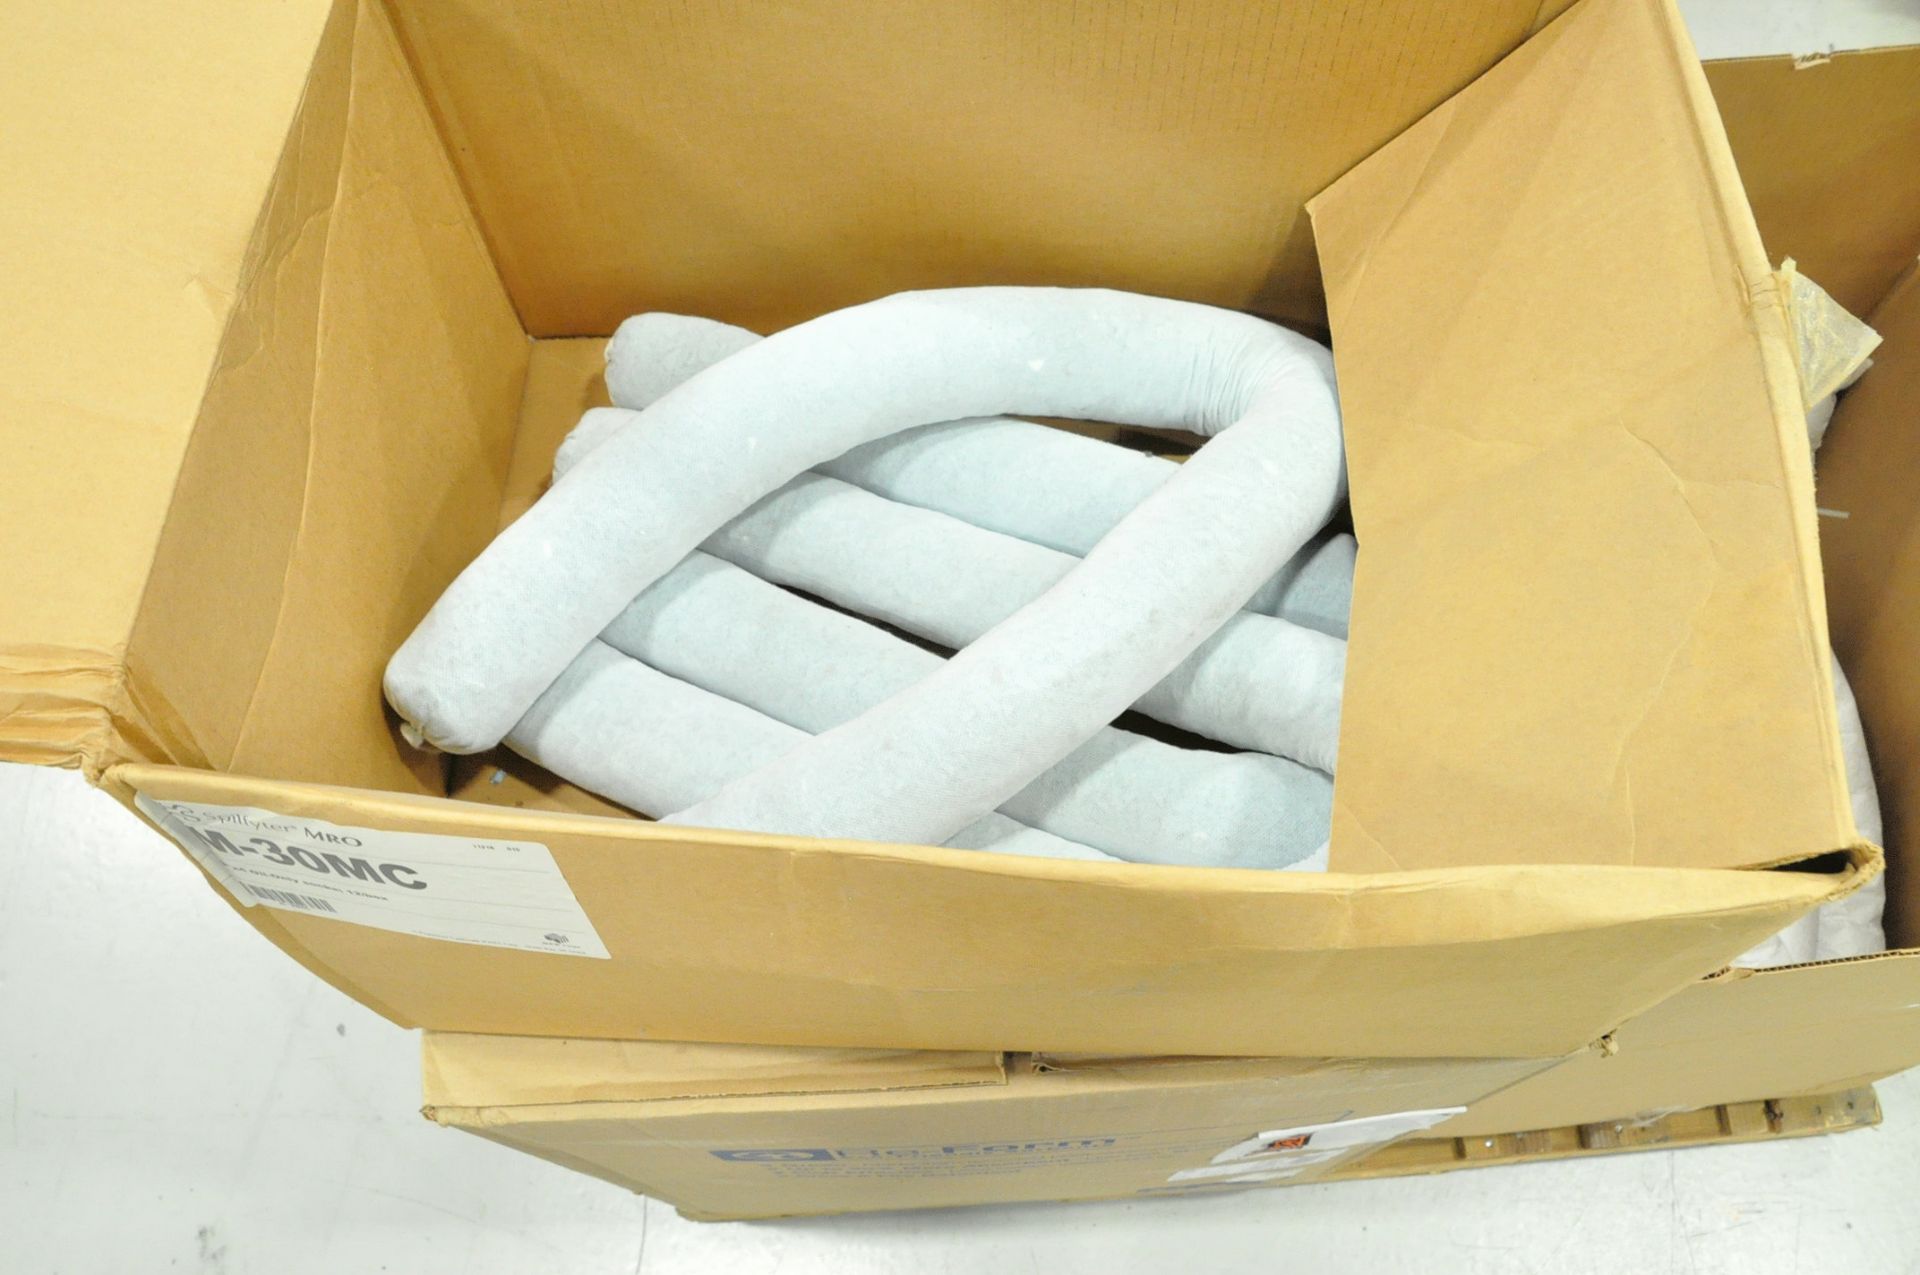 Lot-Floor Dry Absorbent Socks in (3) Boxes on (1) Pallet - Image 3 of 3